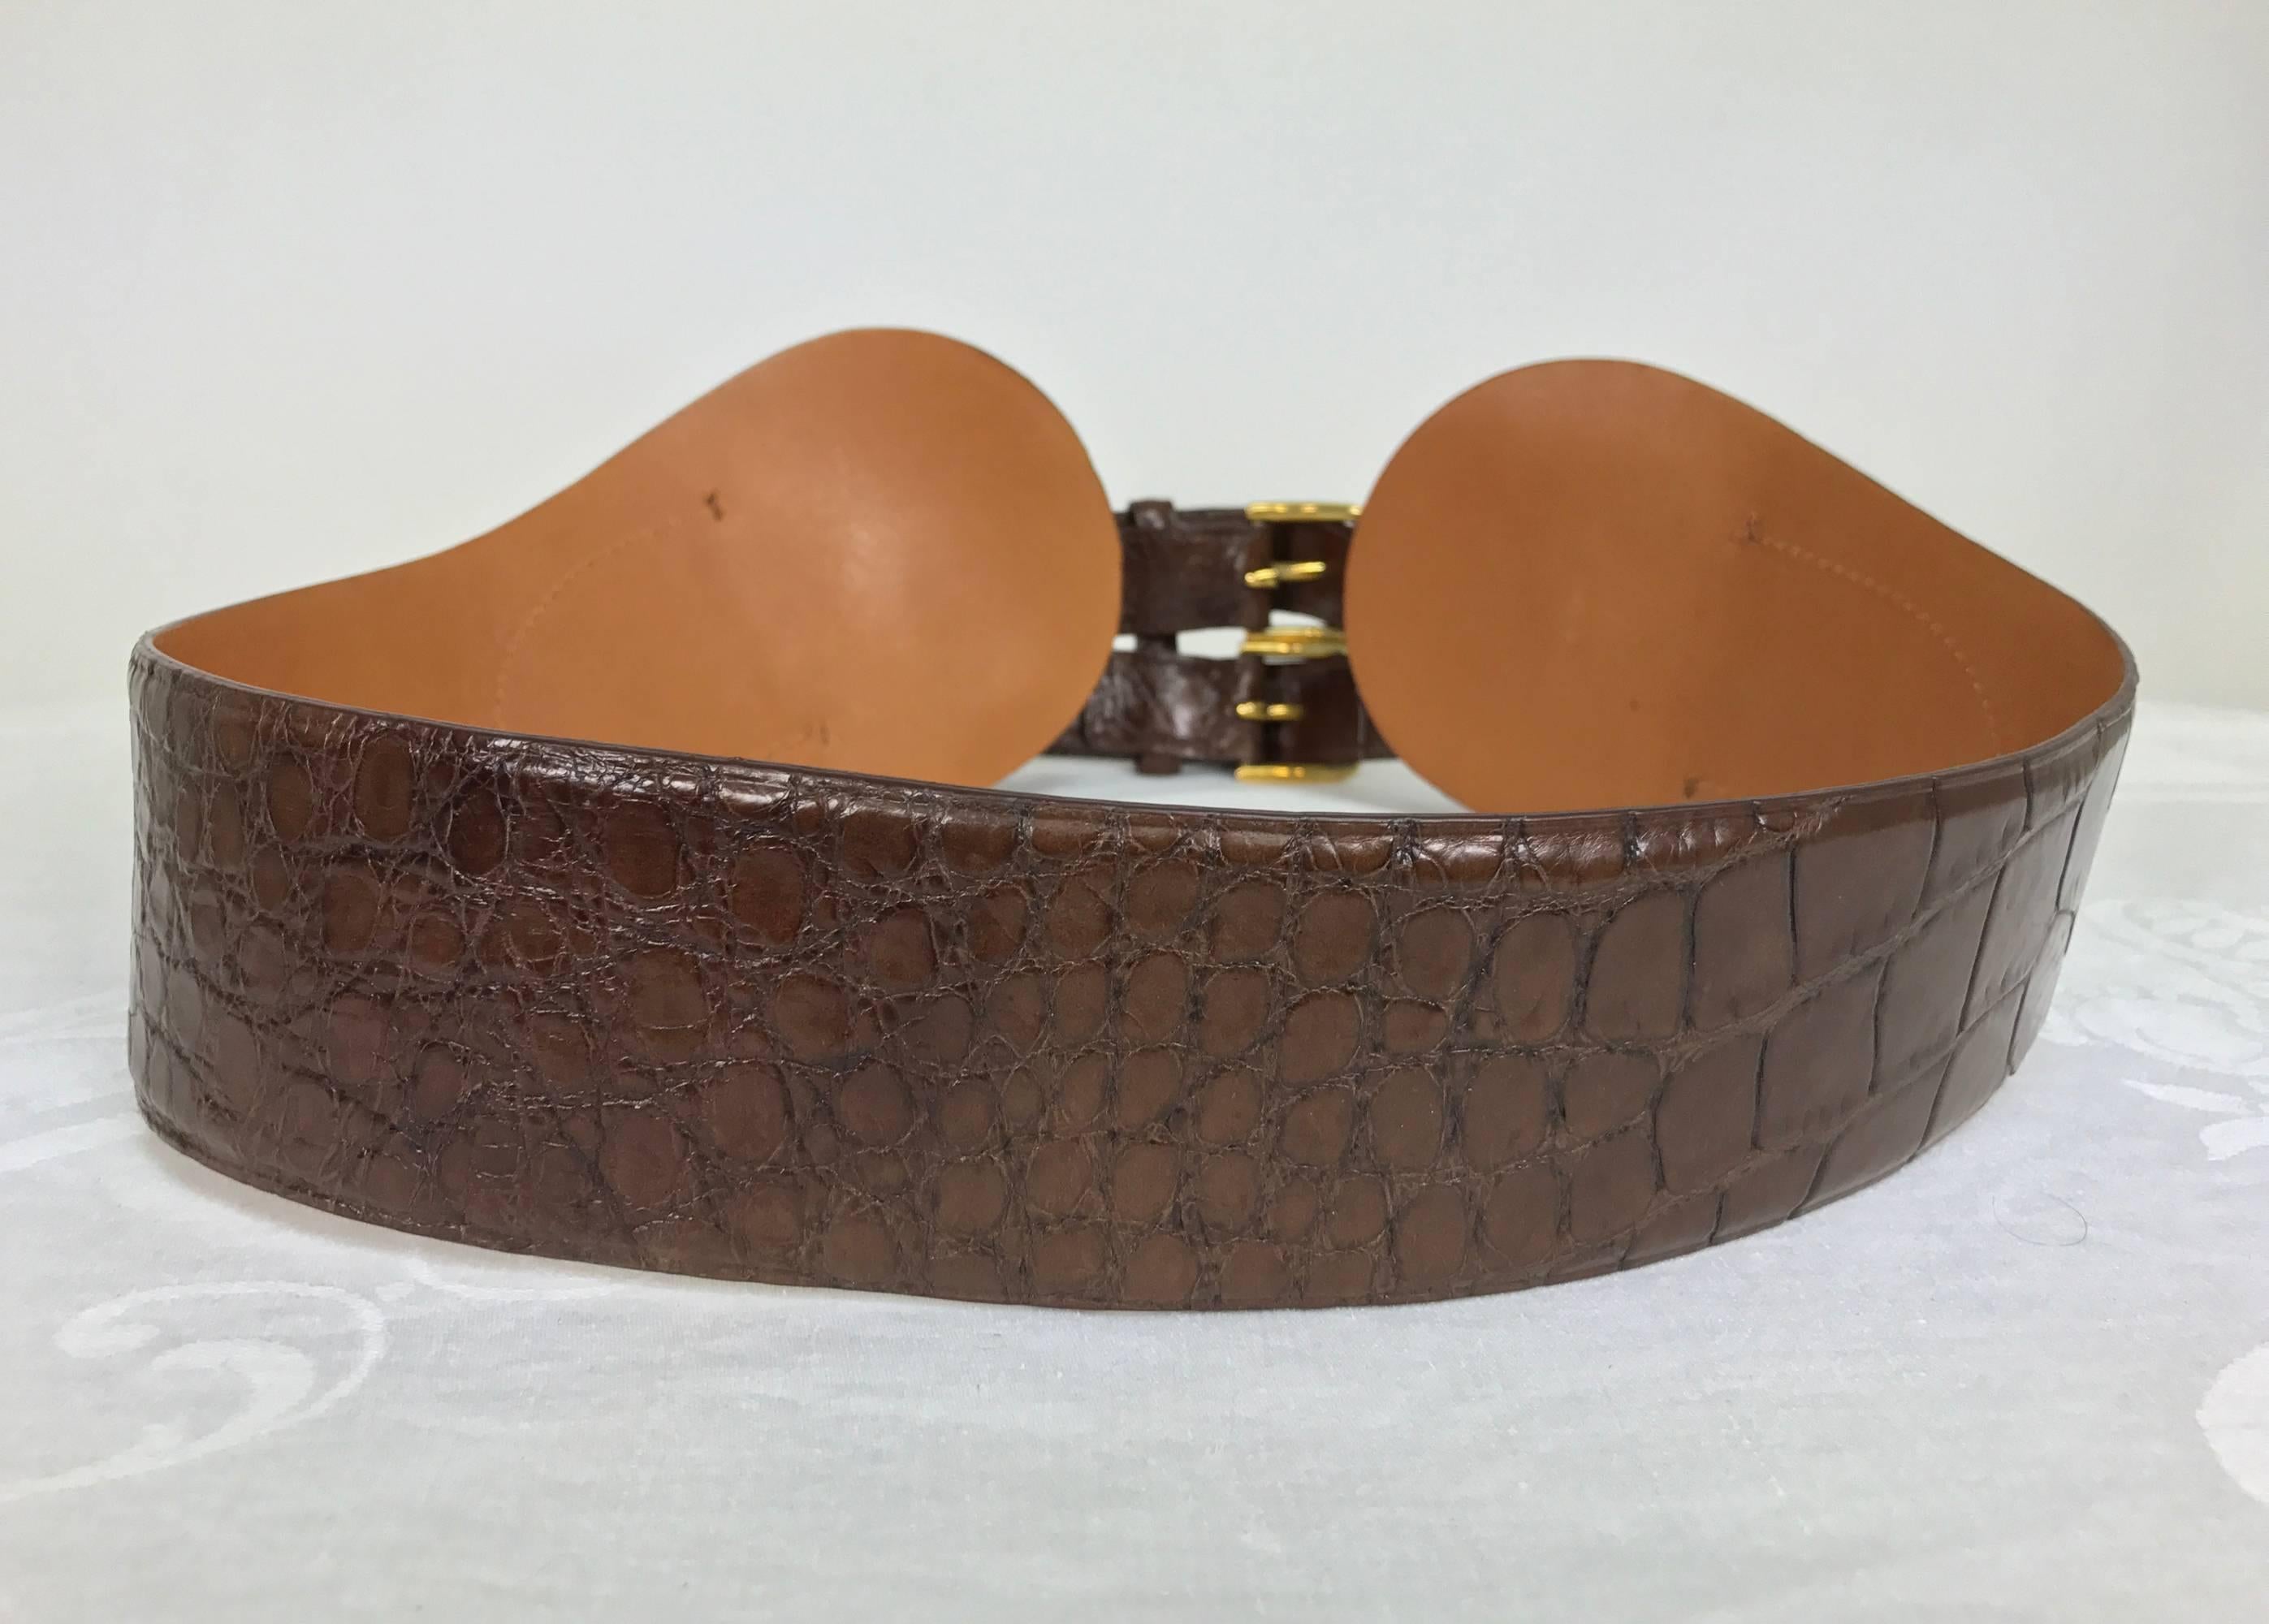 Ralph Lauren wide double strap cognac alligator belt with brass hardware size medium...This belt is barely worn and in beautiful condition...
Measurements are: 
38